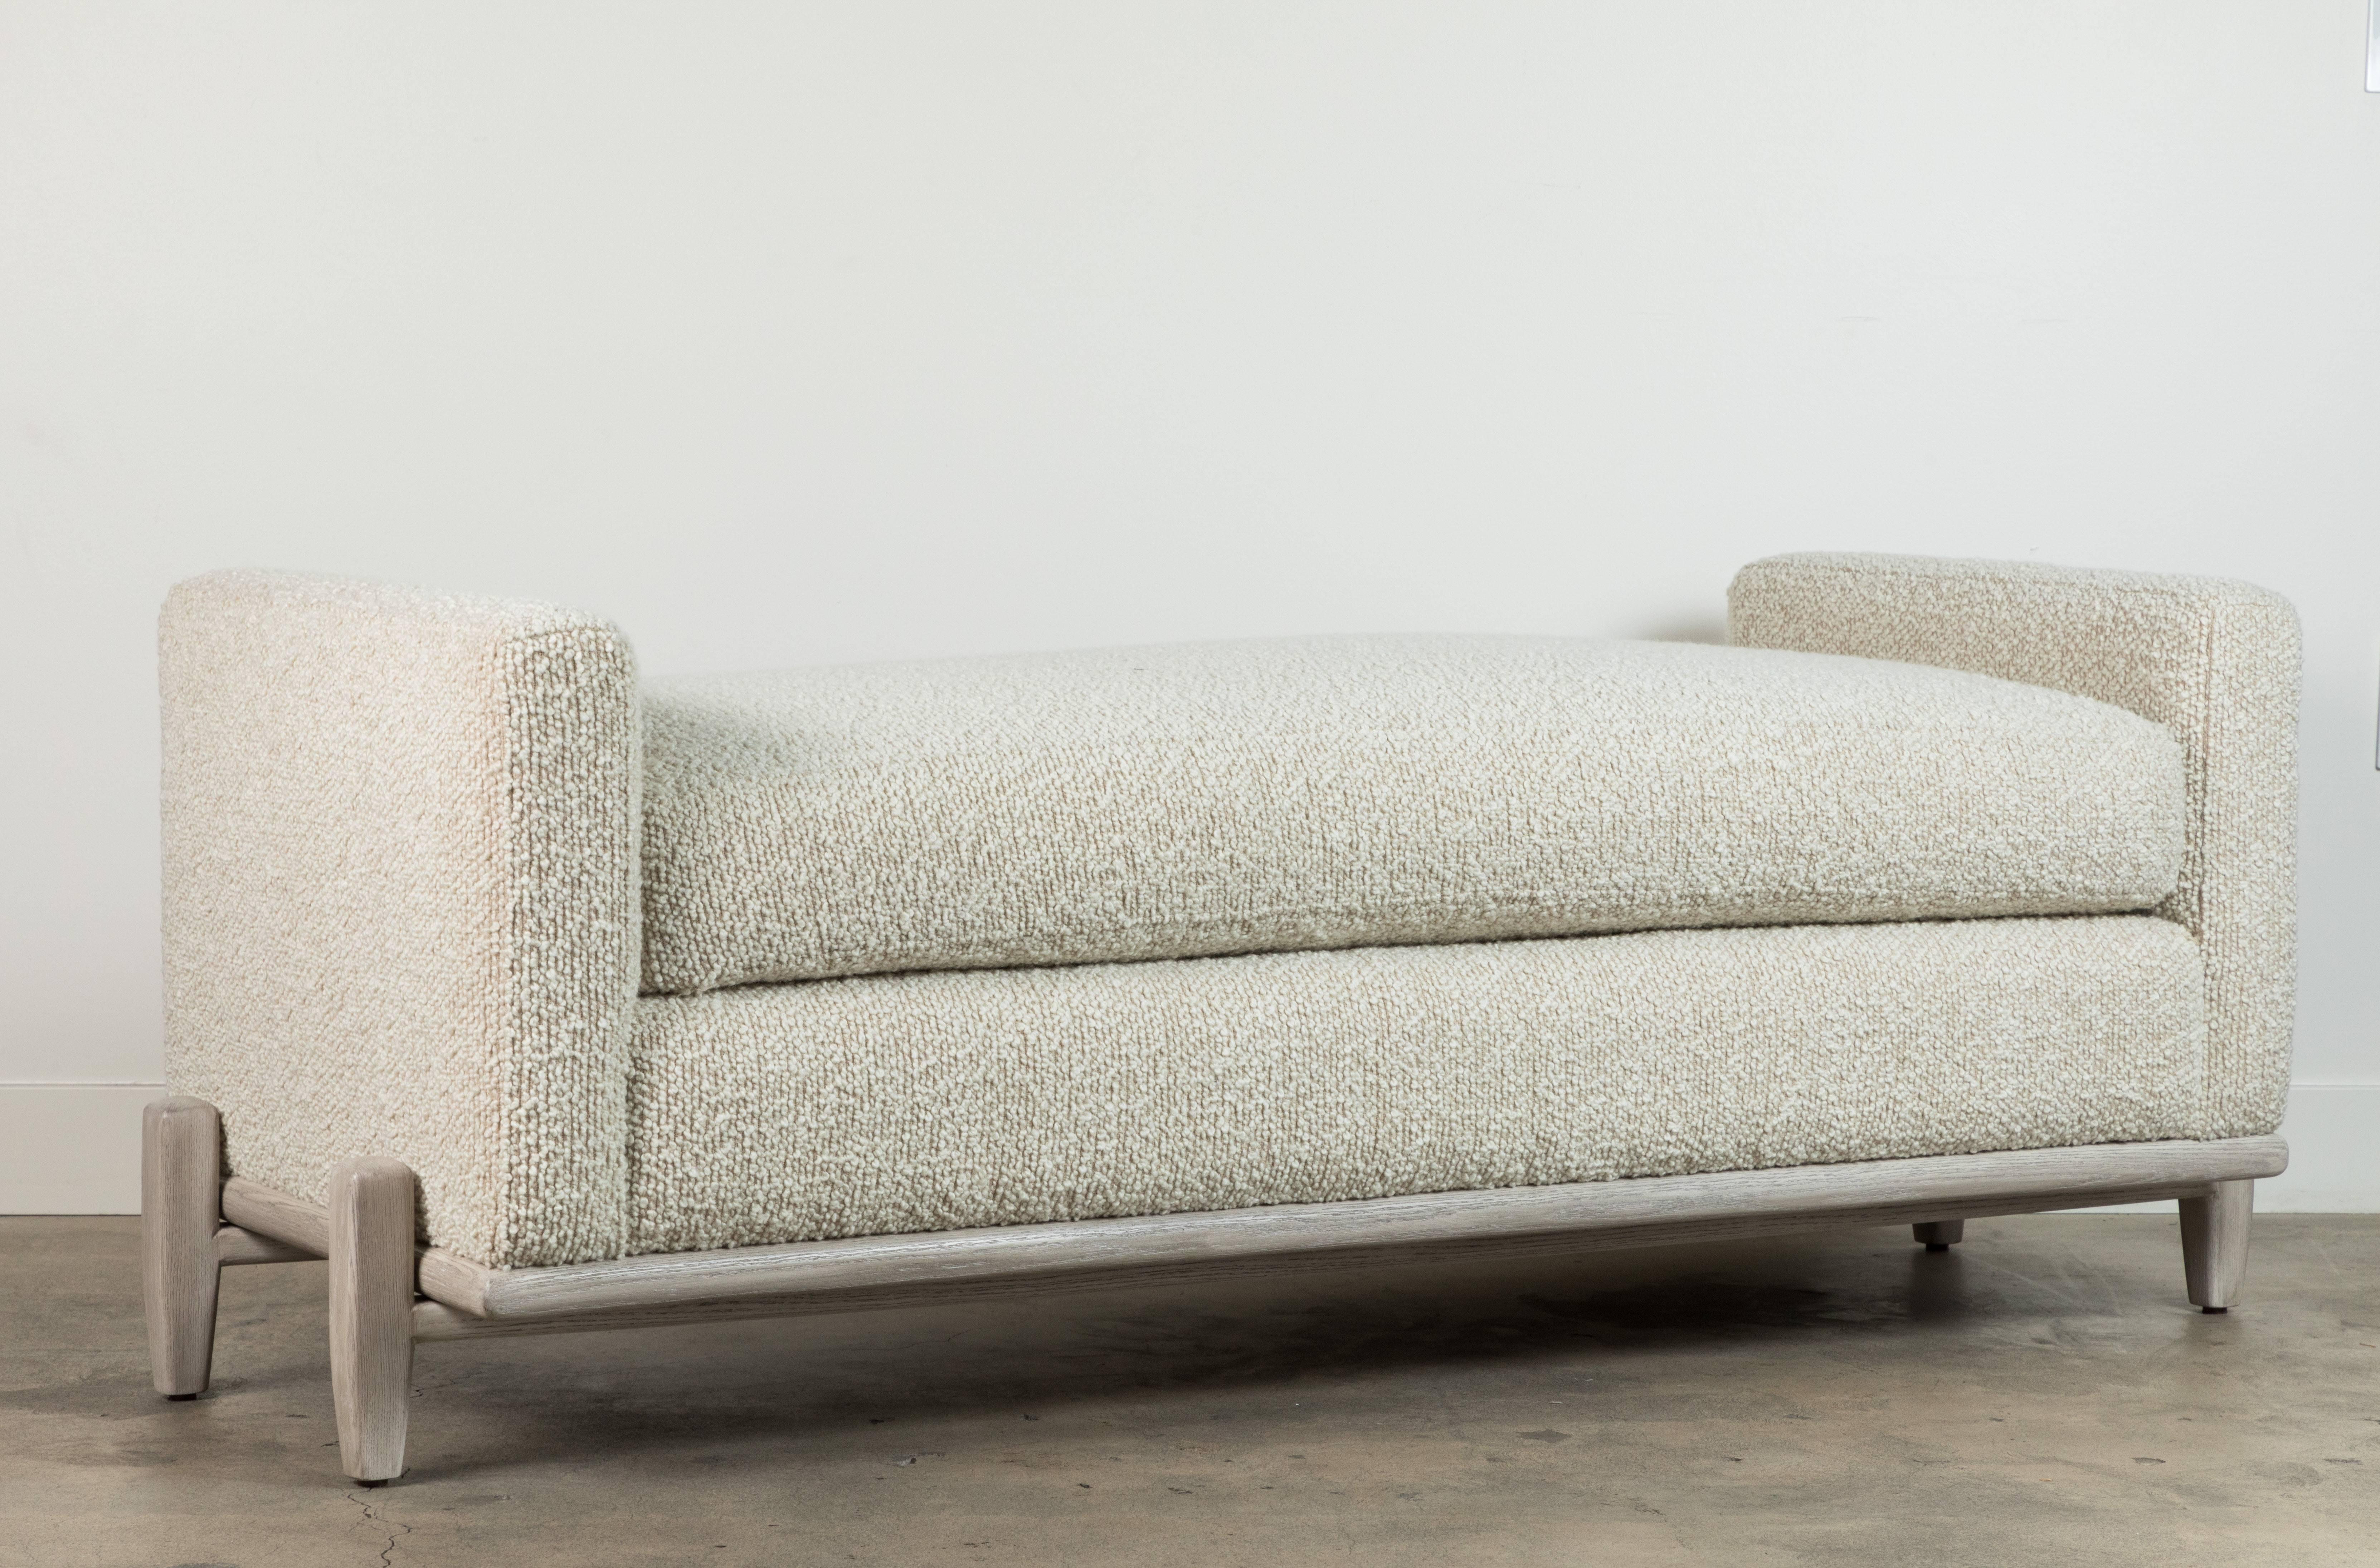 American George Bench by Brian Paquette for Lawson-Fenning